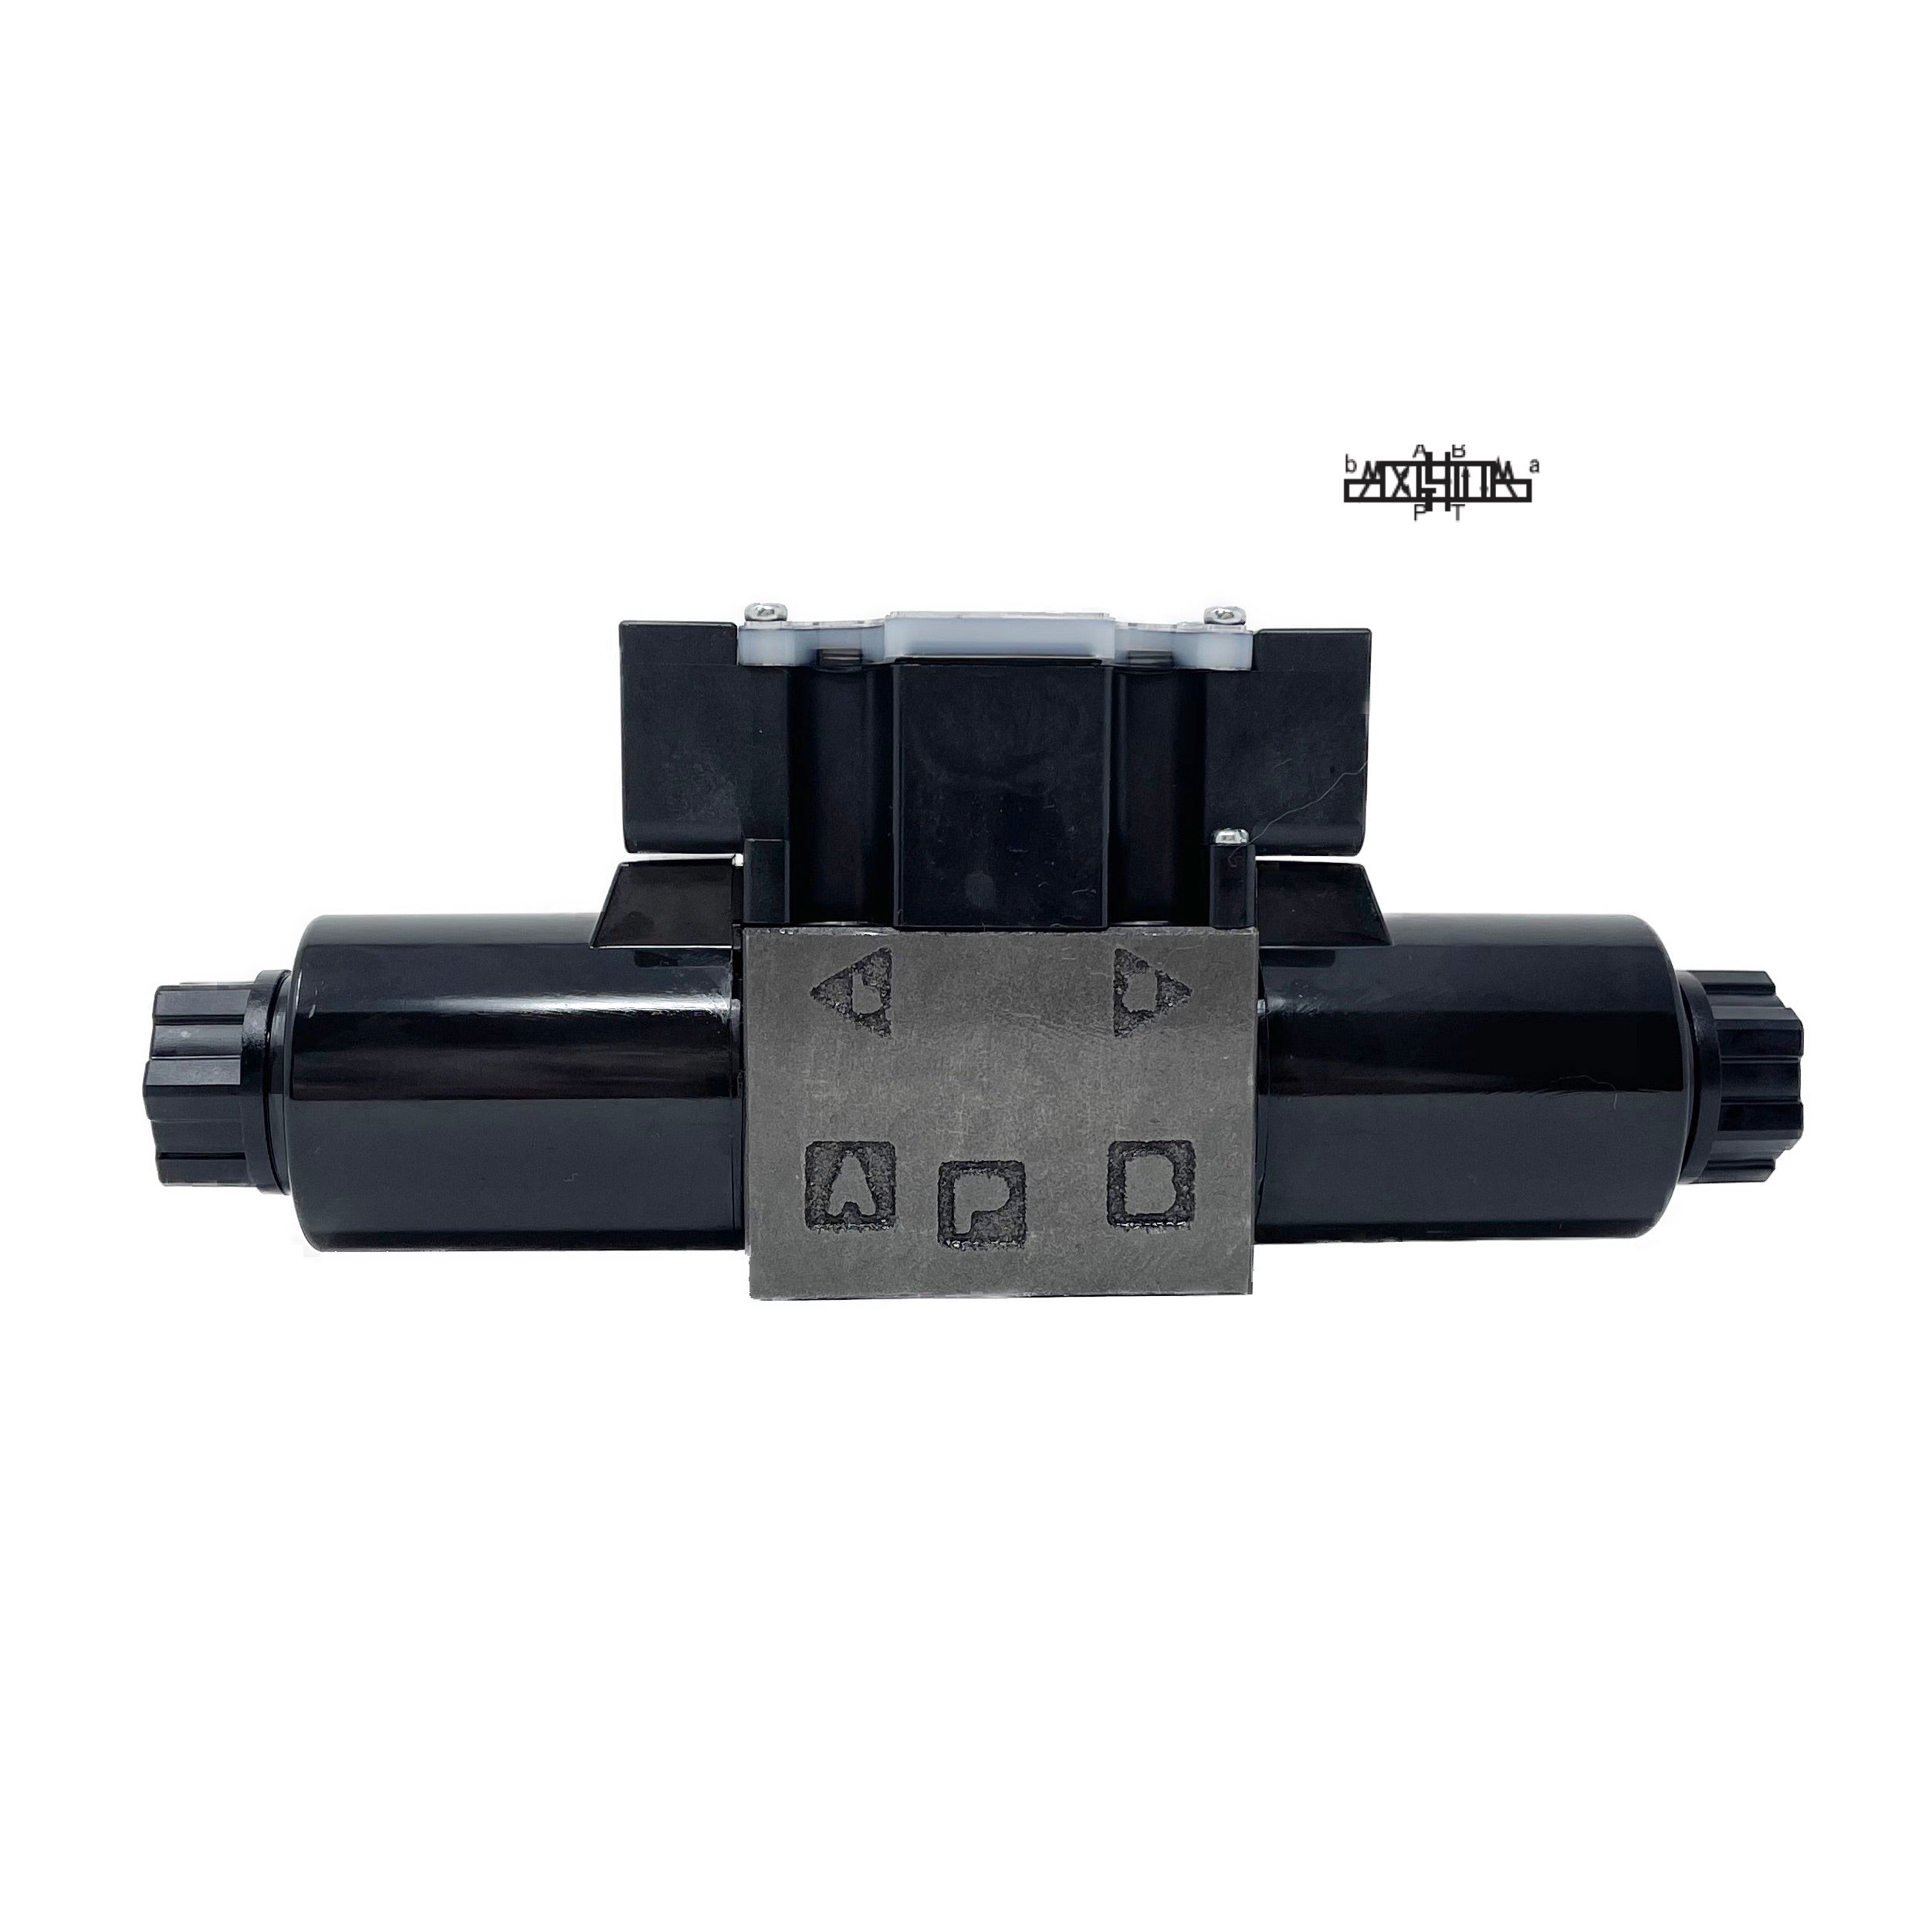 SS-G01-C6-R-E115-E31 : Nachi Solenoid Valve, 3P4W, D03 (NG6), 17.1GPM, 5075psi, Motor Spool, 115 VAC, Wiring Box with Lights, with Built-in Rectifier